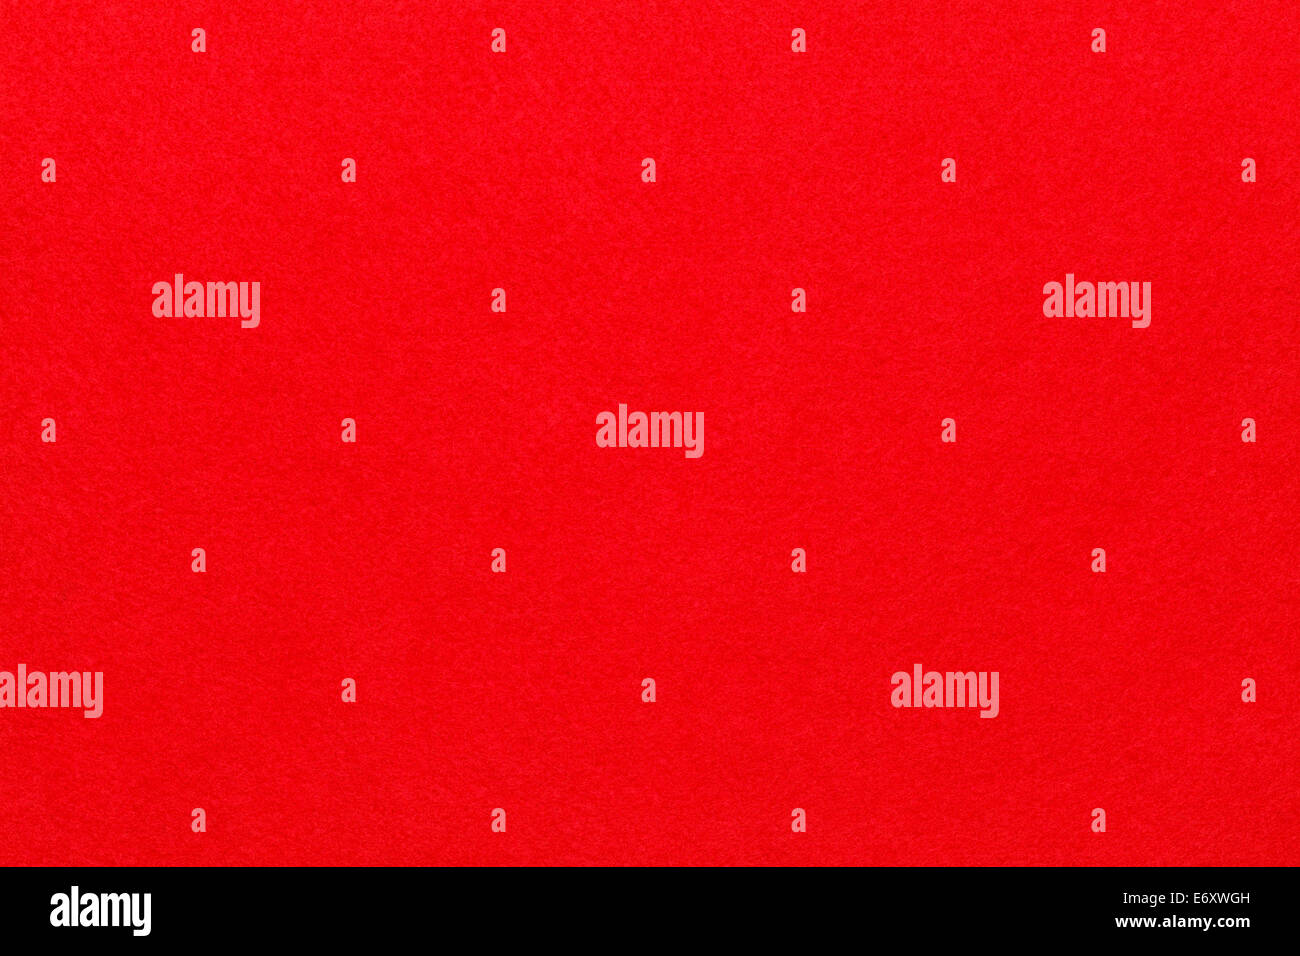 Smooth Red Felt Fabric Background Texture Top View. Stock Photo